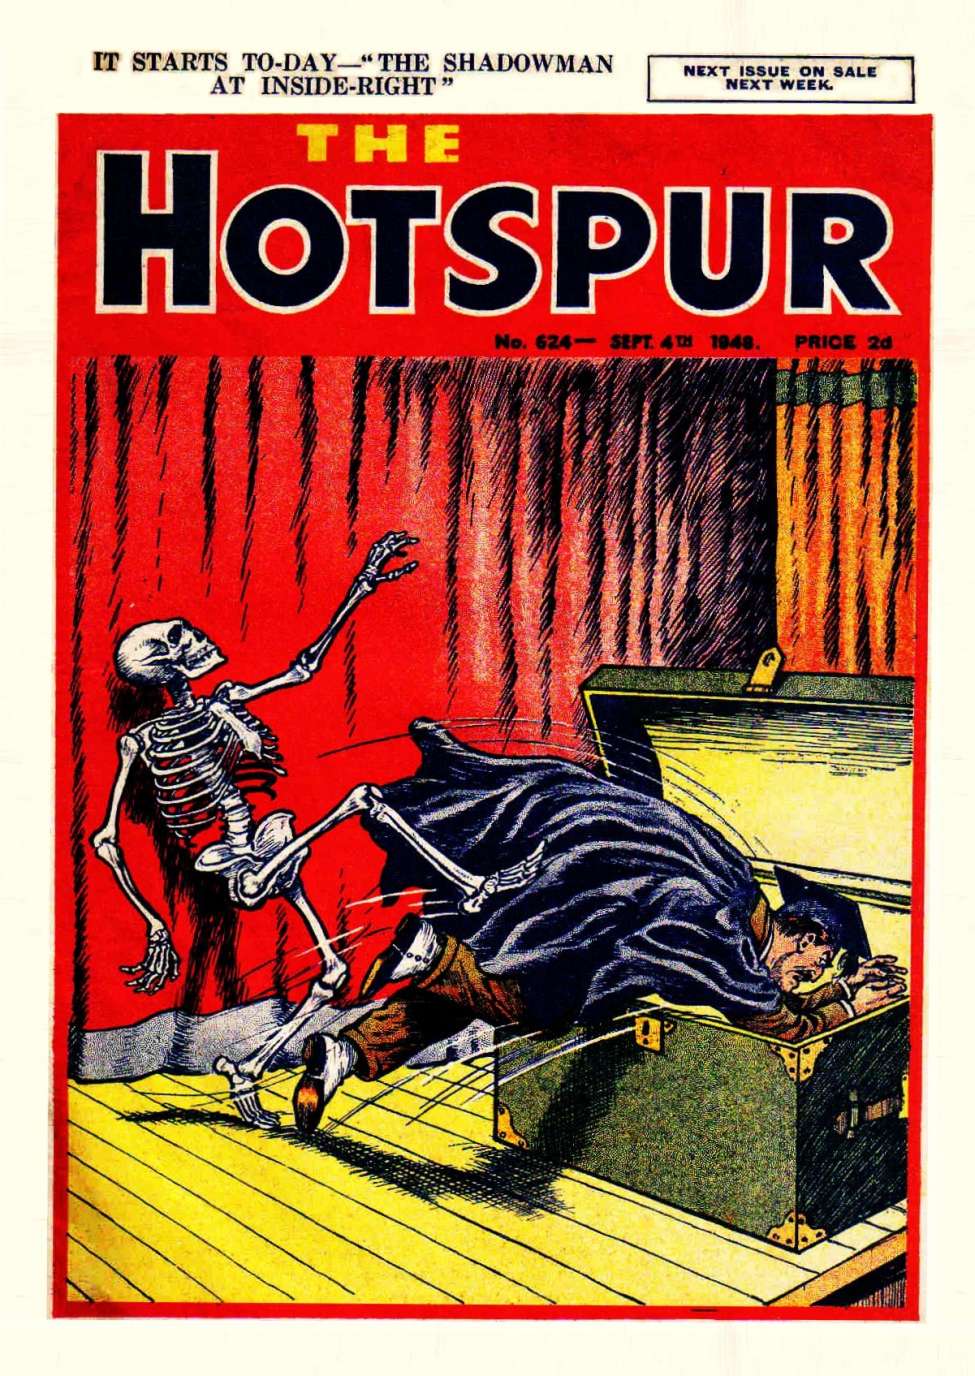 Comic Book Cover For The Hotspur 624